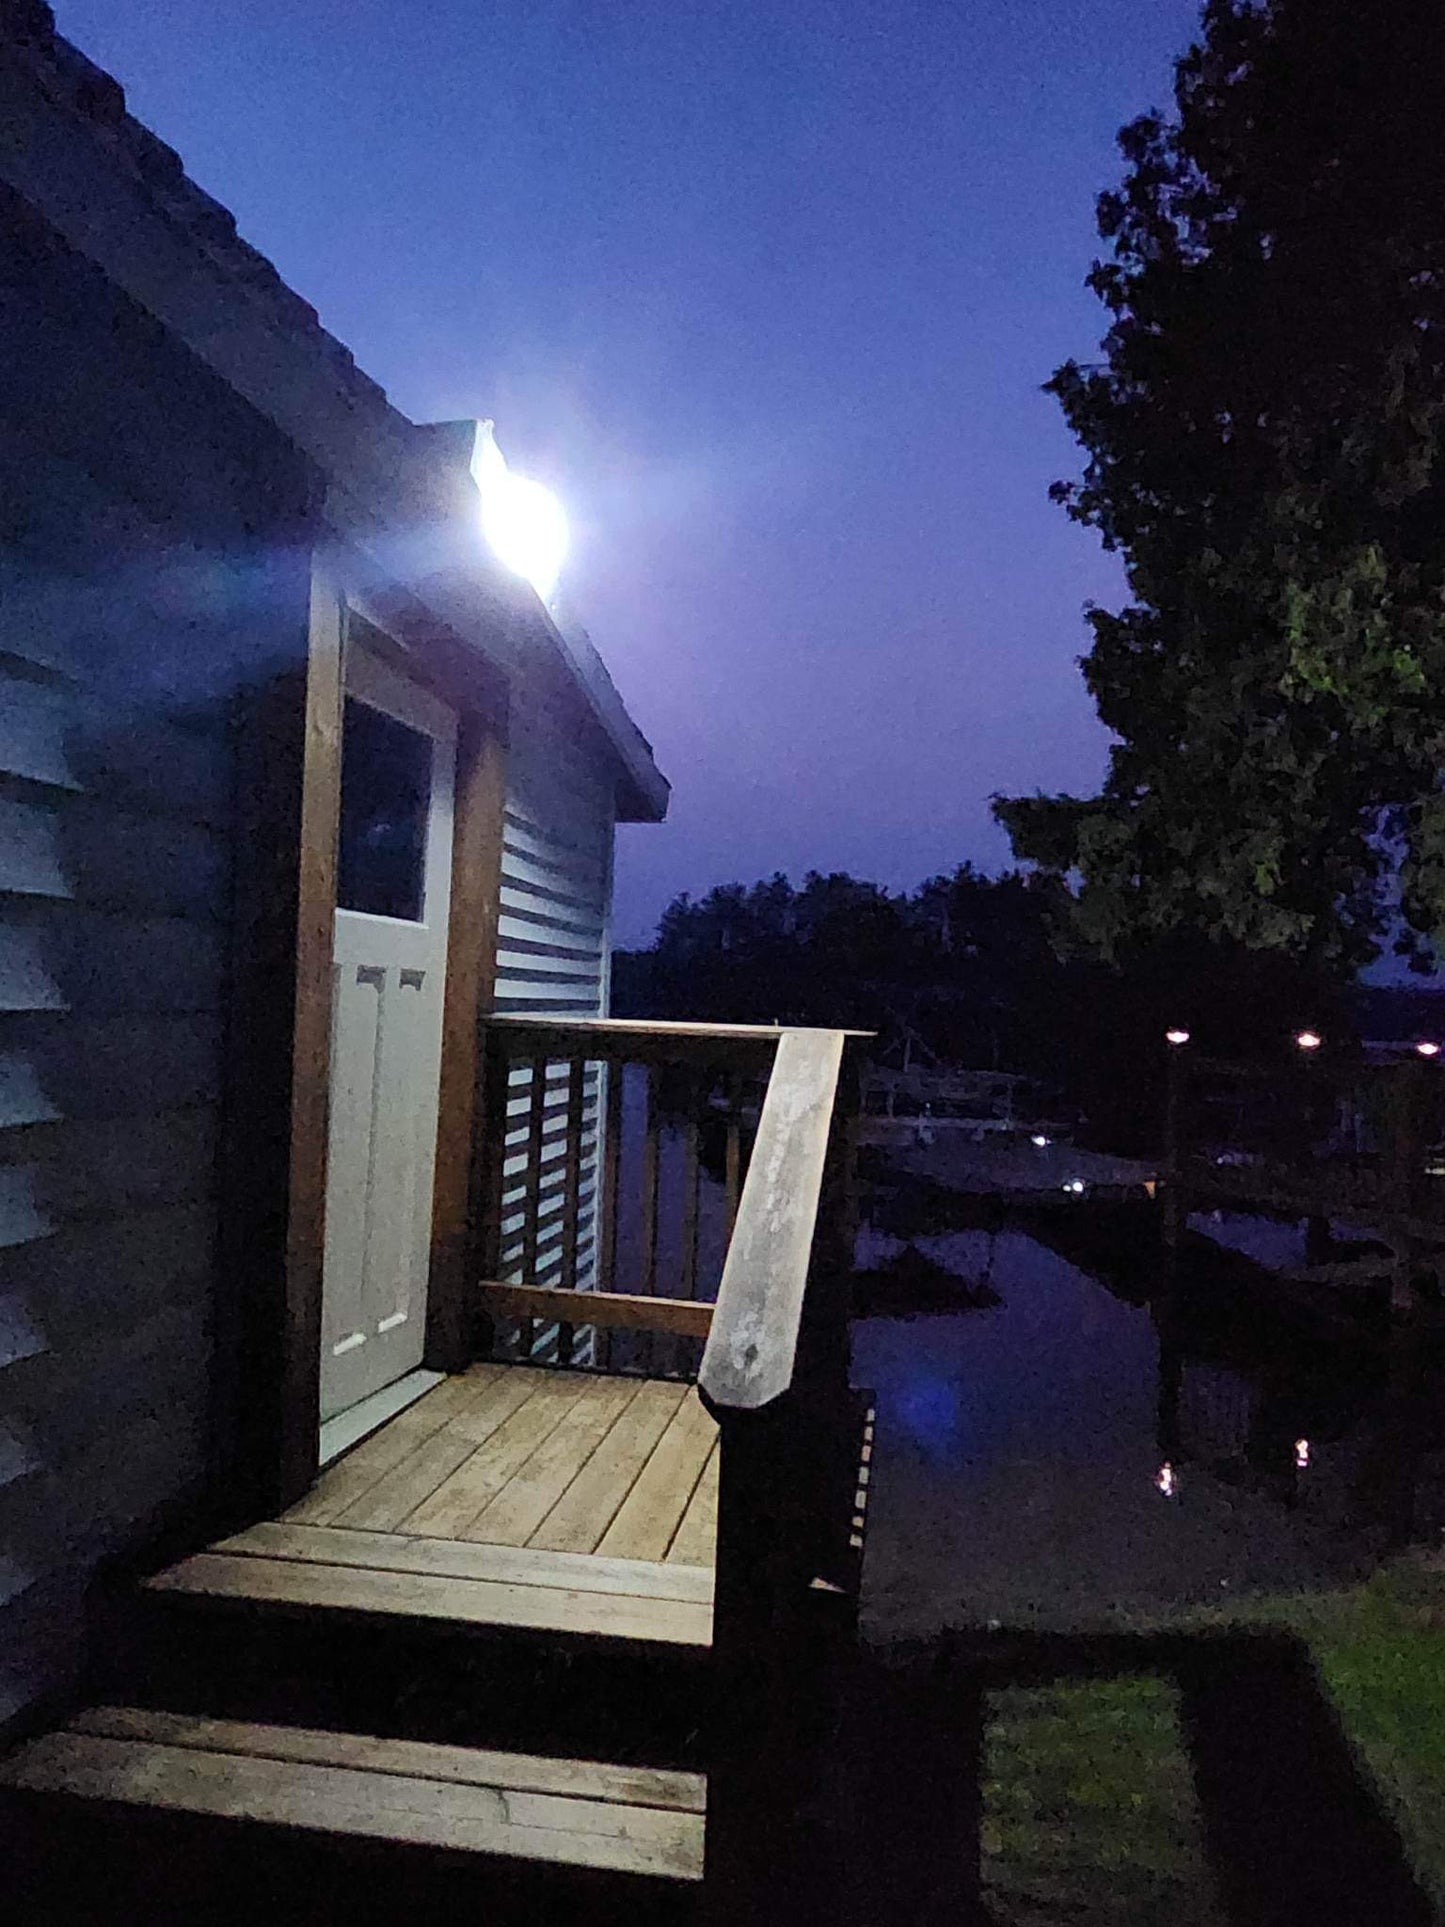 BigM 190 LED Bright Outdoor Solar Security Lights with Motion Sensor illuminates a staircase at night at a cottage